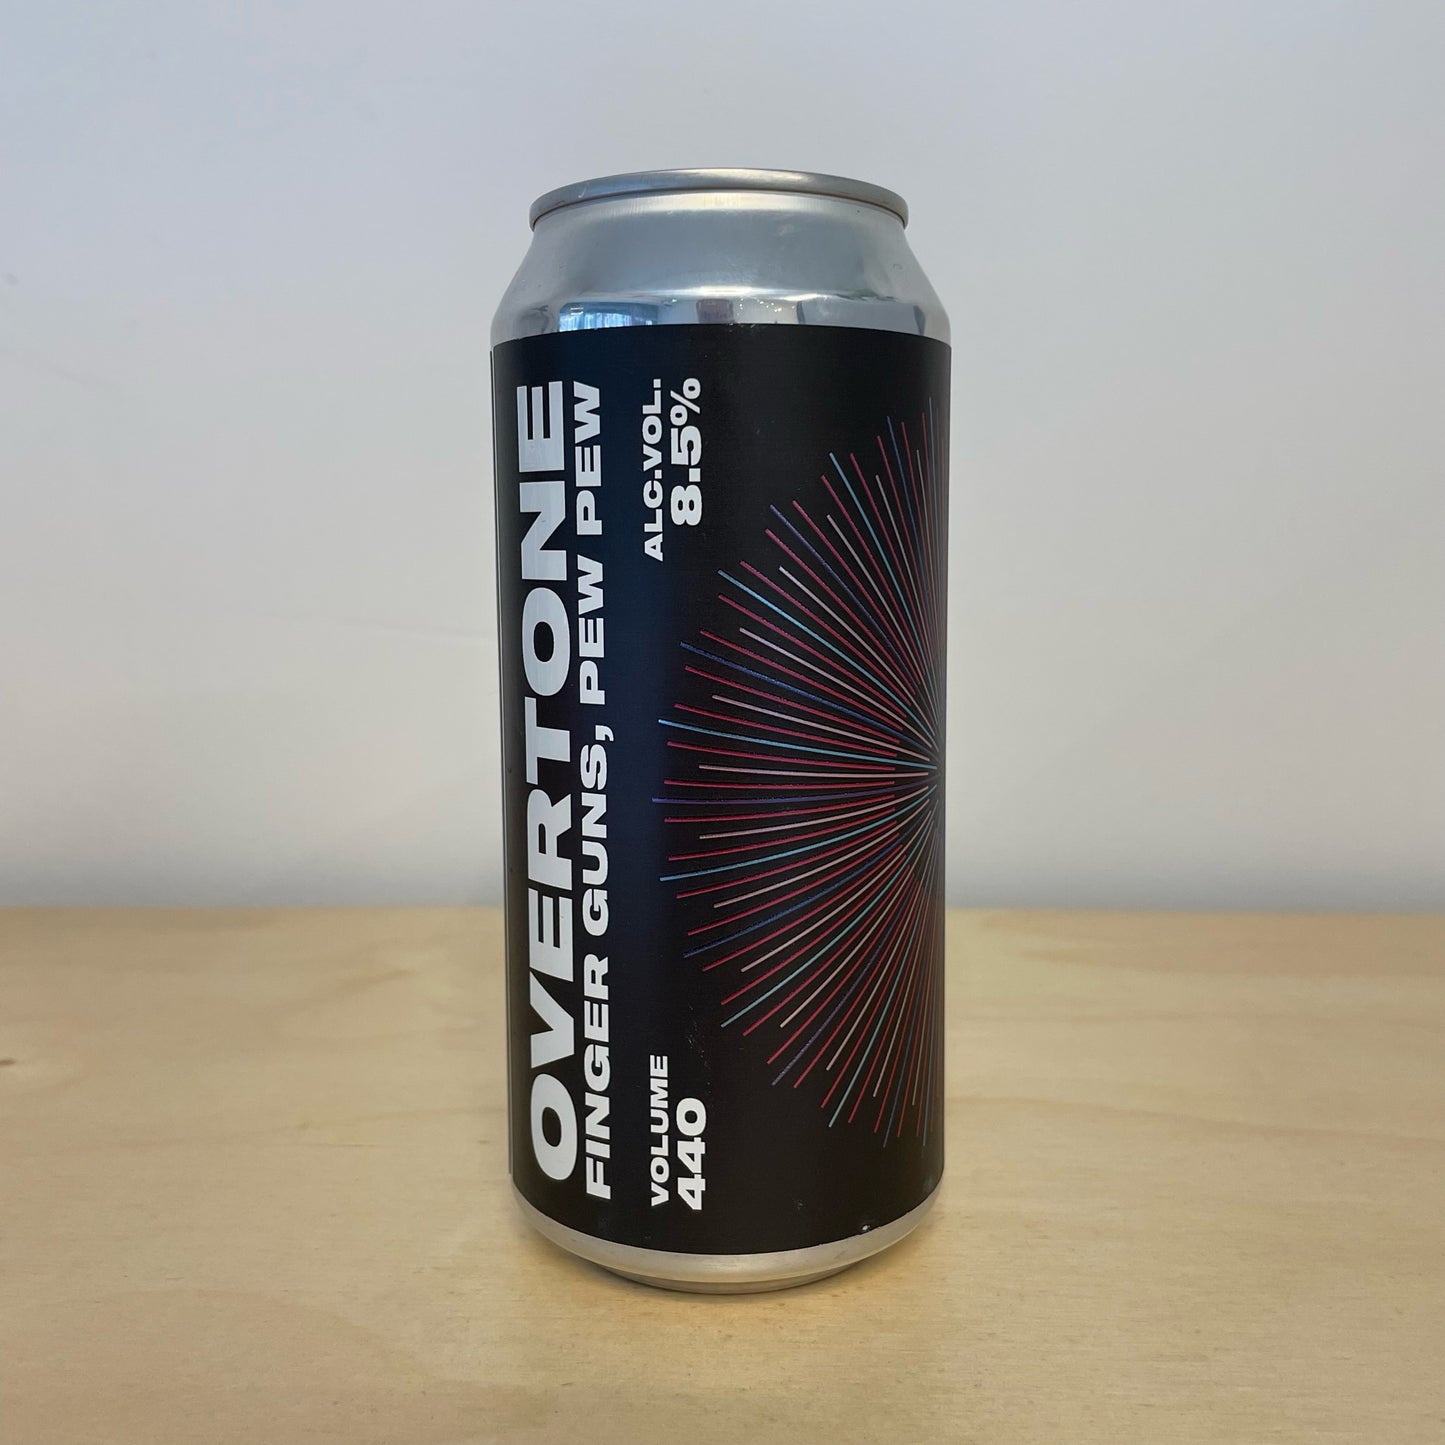 Overtone Finger Guns, Pew Pew (440ml Can)